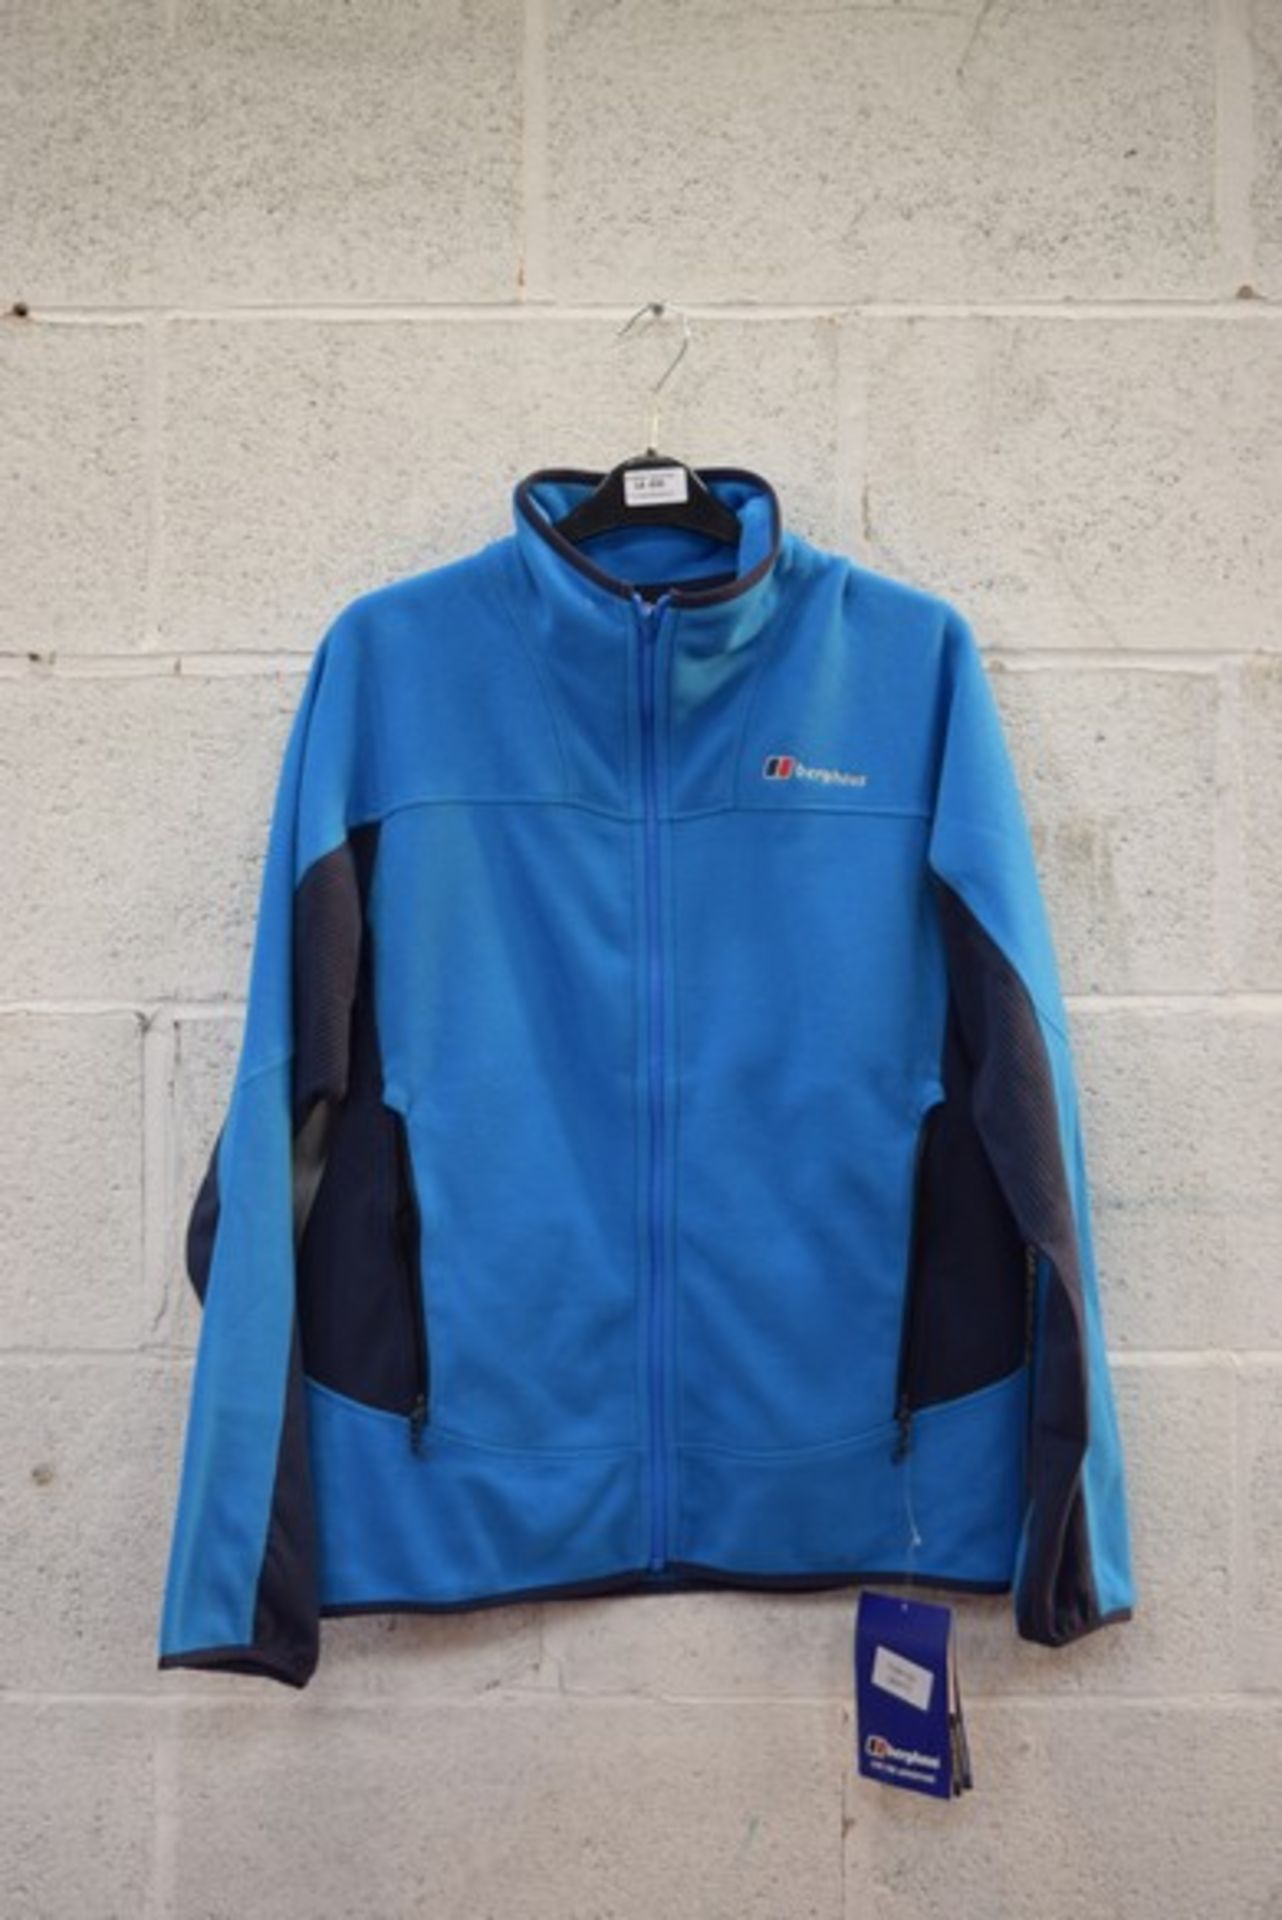 1 x BERGHAUS FLEECE JACKET SIZE S (WITH TAGS) RRP £60 *PLEASE NOTE THAT THE BID PRICE IS